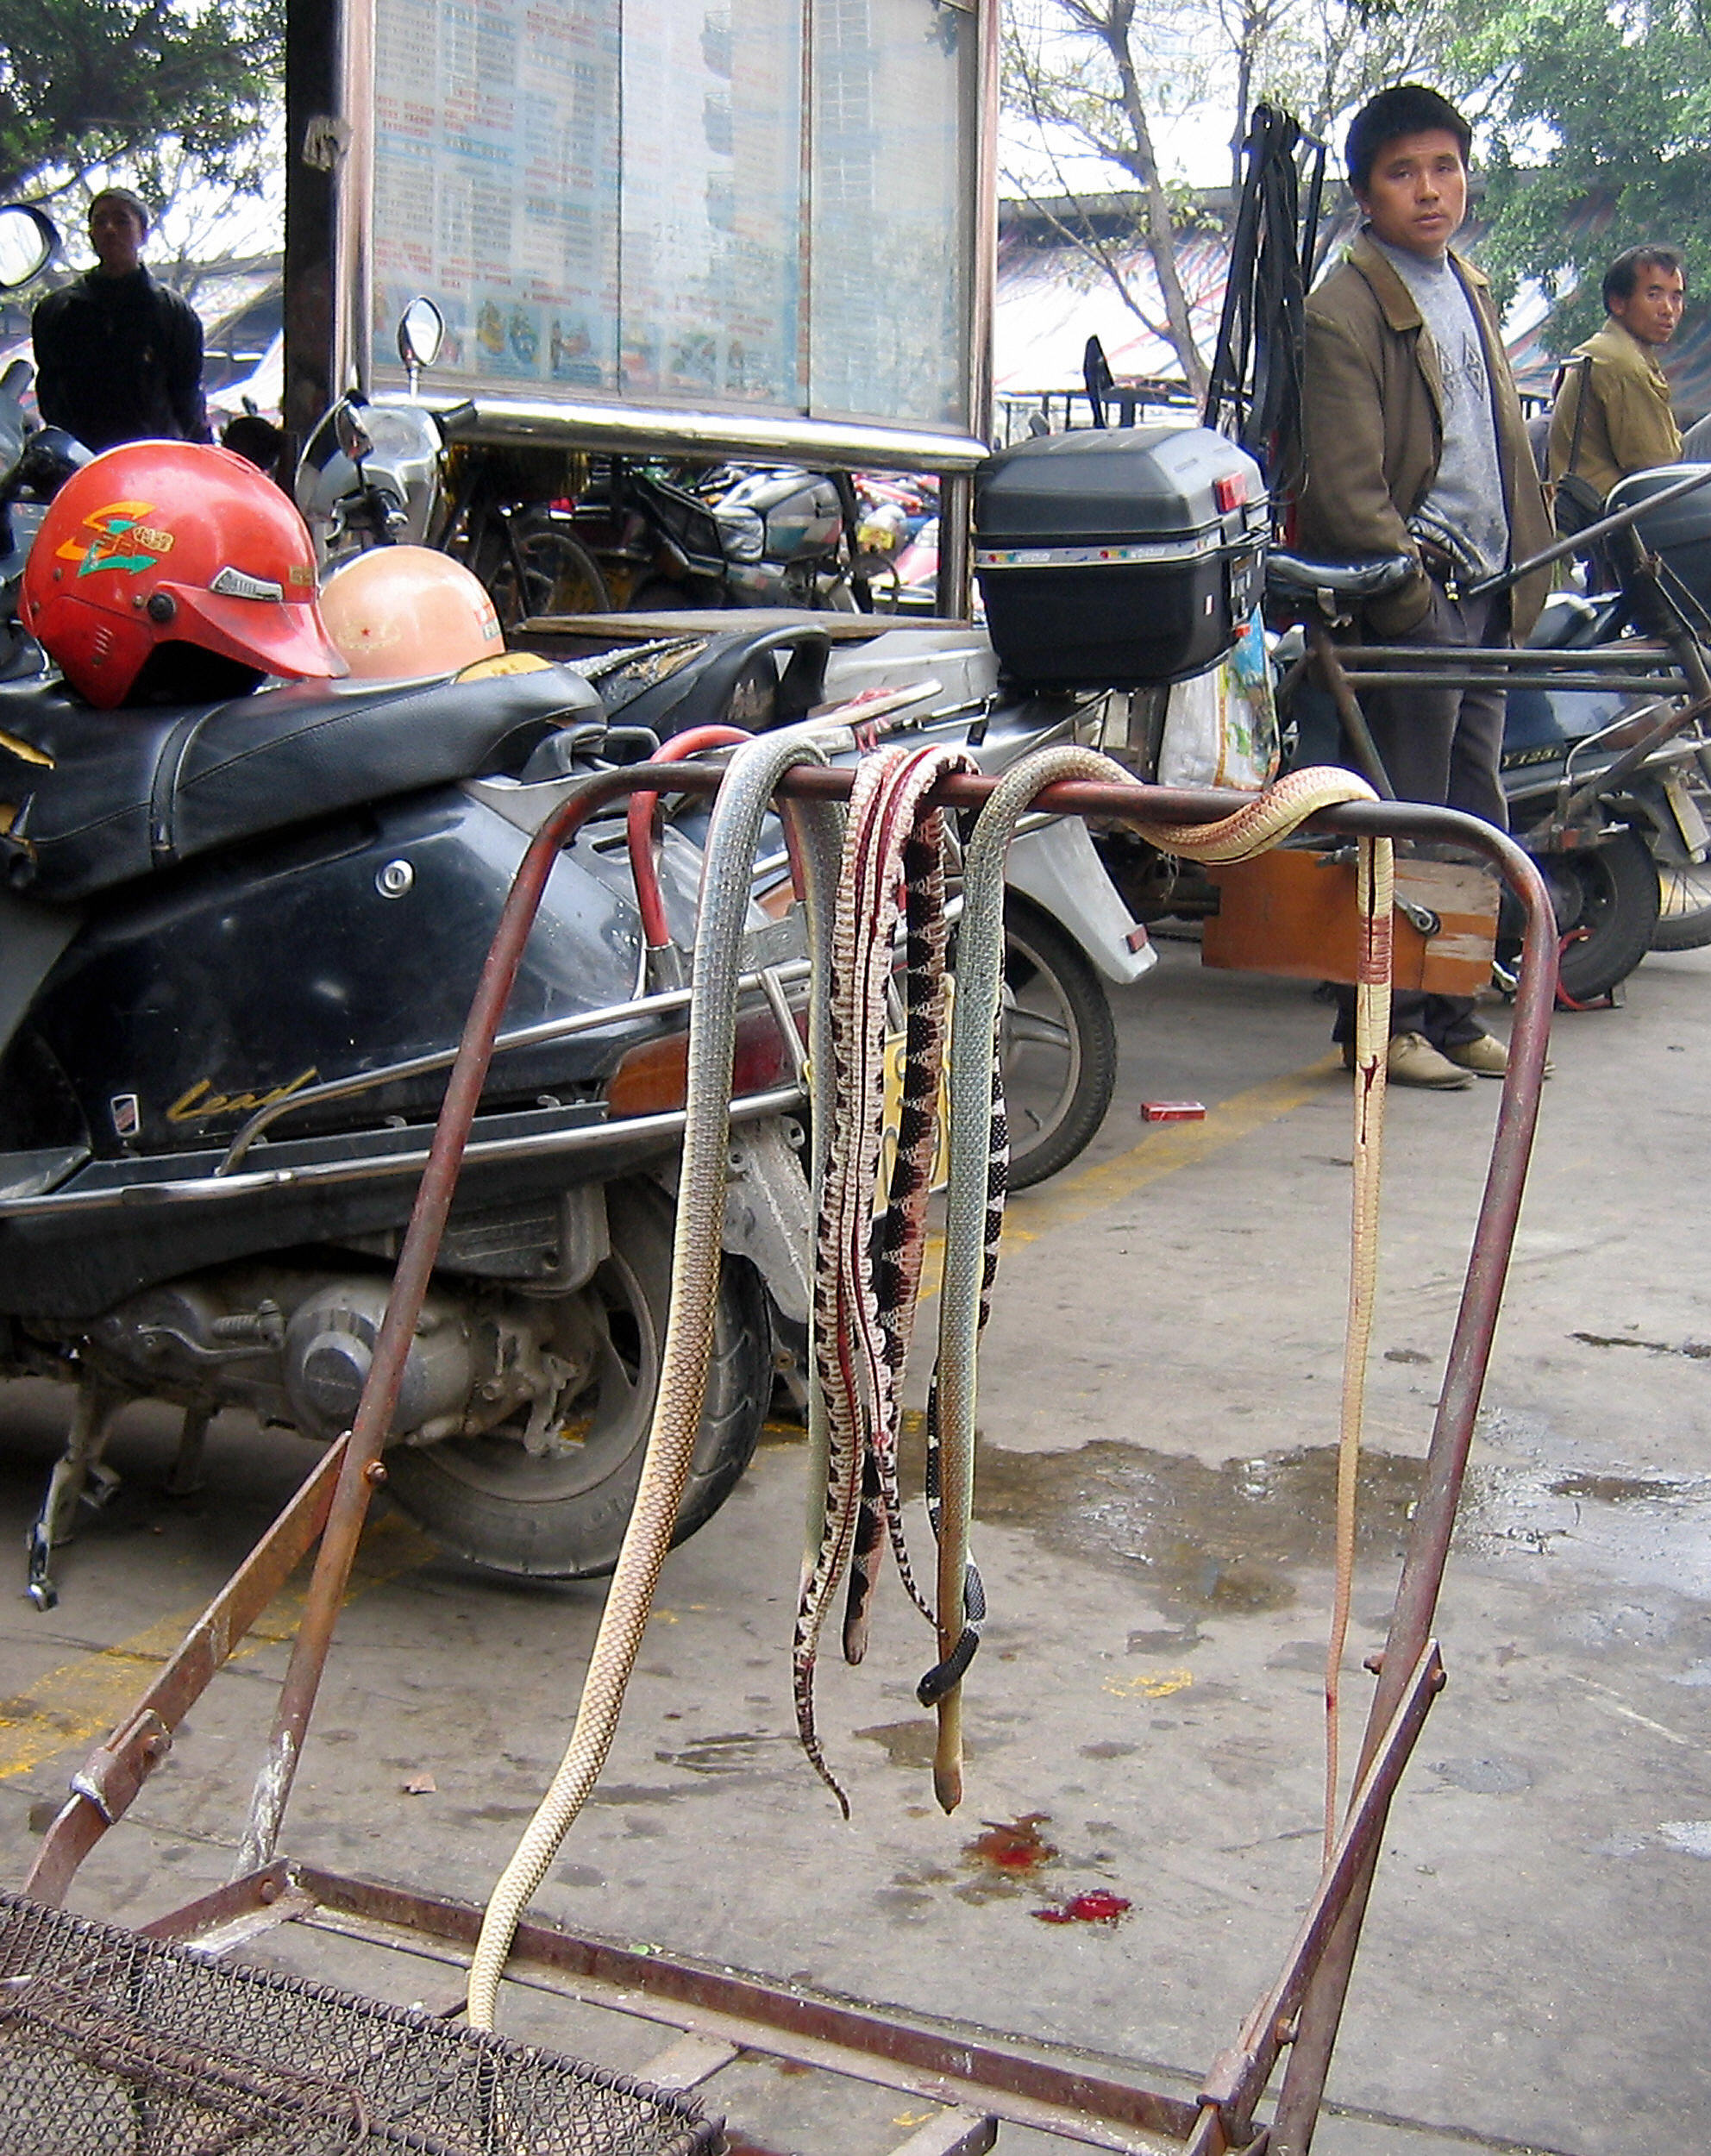  Various type of snakes hang from a push-cart at the Xi Cun meat market in Dongguan, southern China's Guangdong province 23 January 2005. (ROBERT J.SAIGET/AFP via Getty Images)